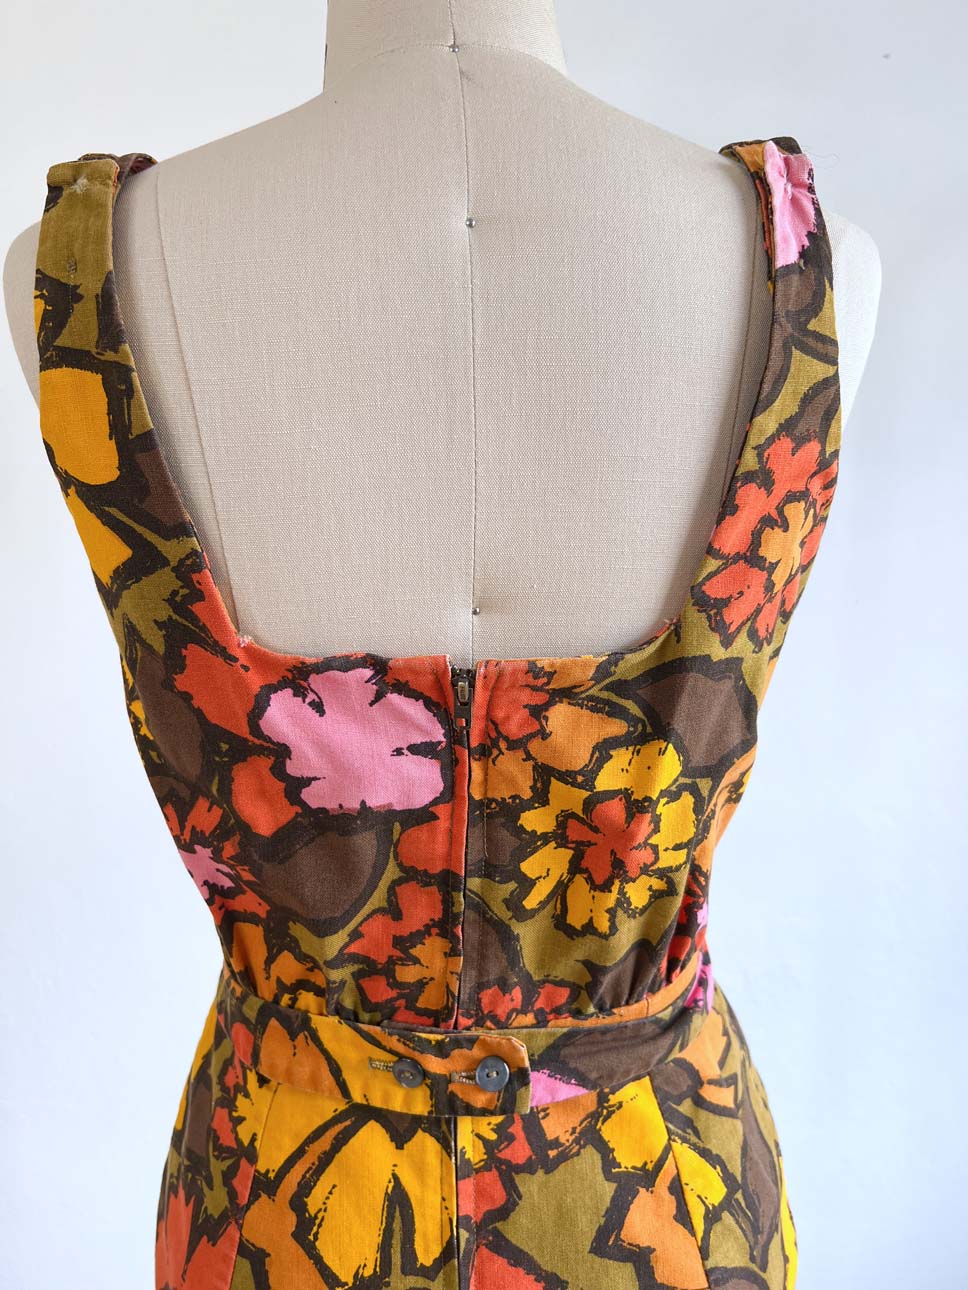 Vintage 1950s to 1960s Sculpted Shorts Romper - Designer Cotton Mod Saturated Olive, Orange, Pink Cotton Designer Swimsuit Playsuit Size XS to S